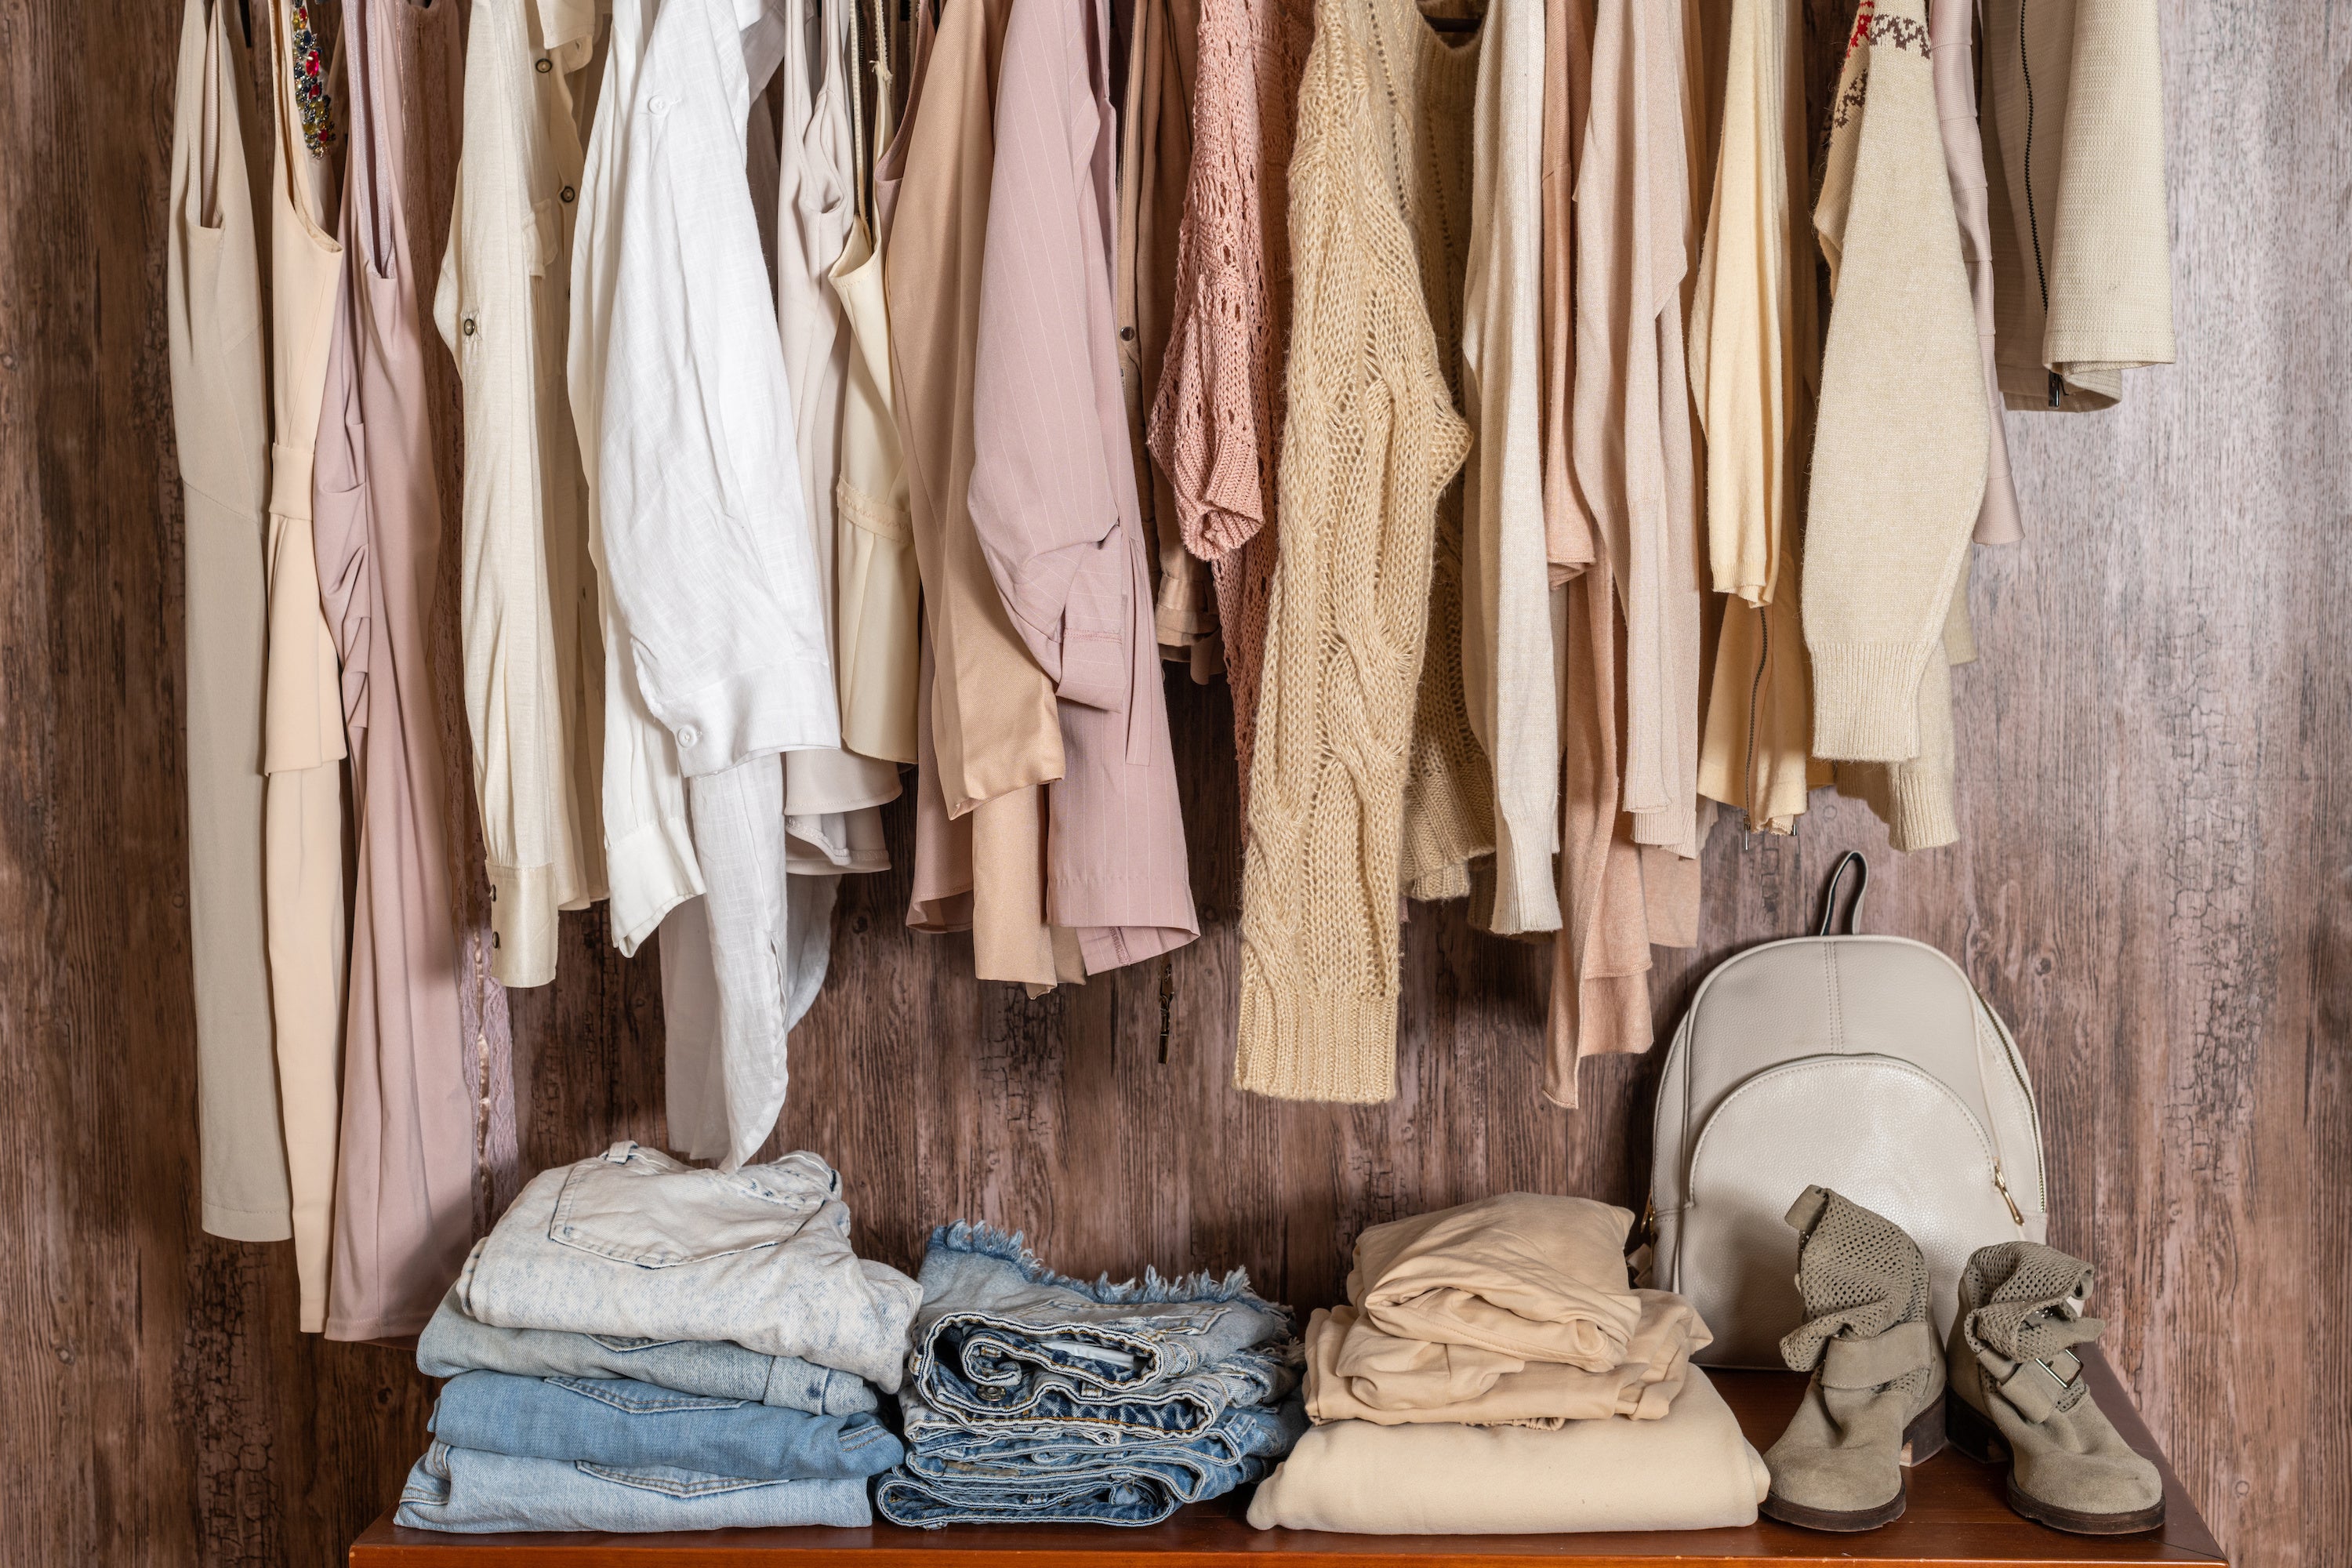 https://cdn.shopify.com/s/files/1/0594/8519/2376/articles/a-closet-full-of-hanging-and-folded-clothing.jpg?v=1633445208